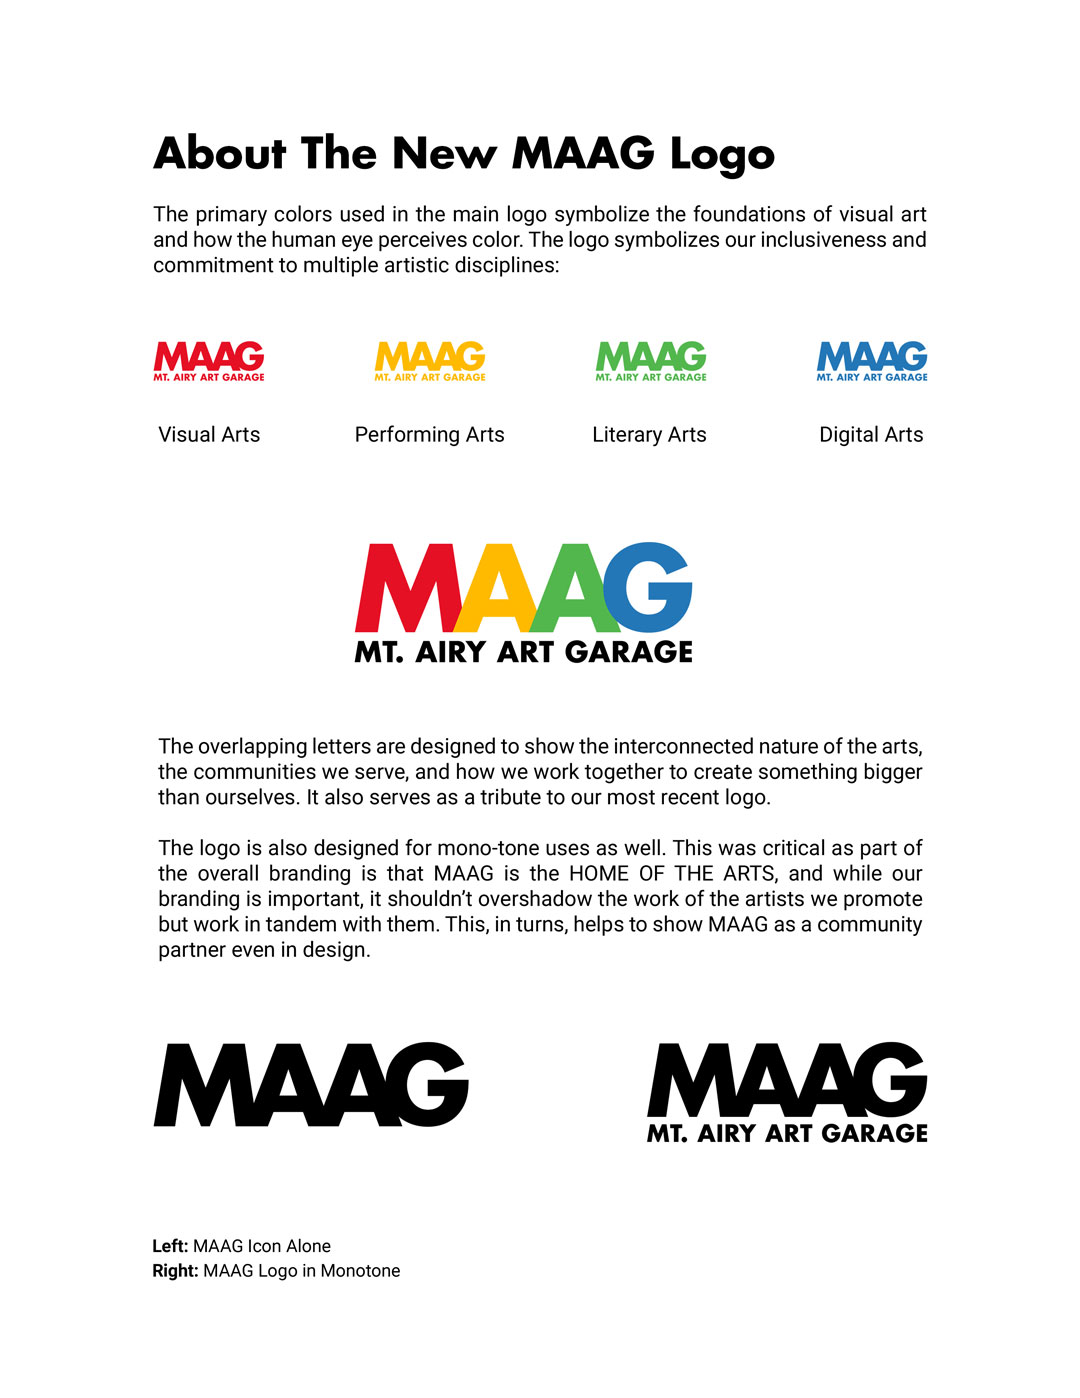 MAAG Logo Redesign 2020 Branding Guide Page 3 - About the New Logo